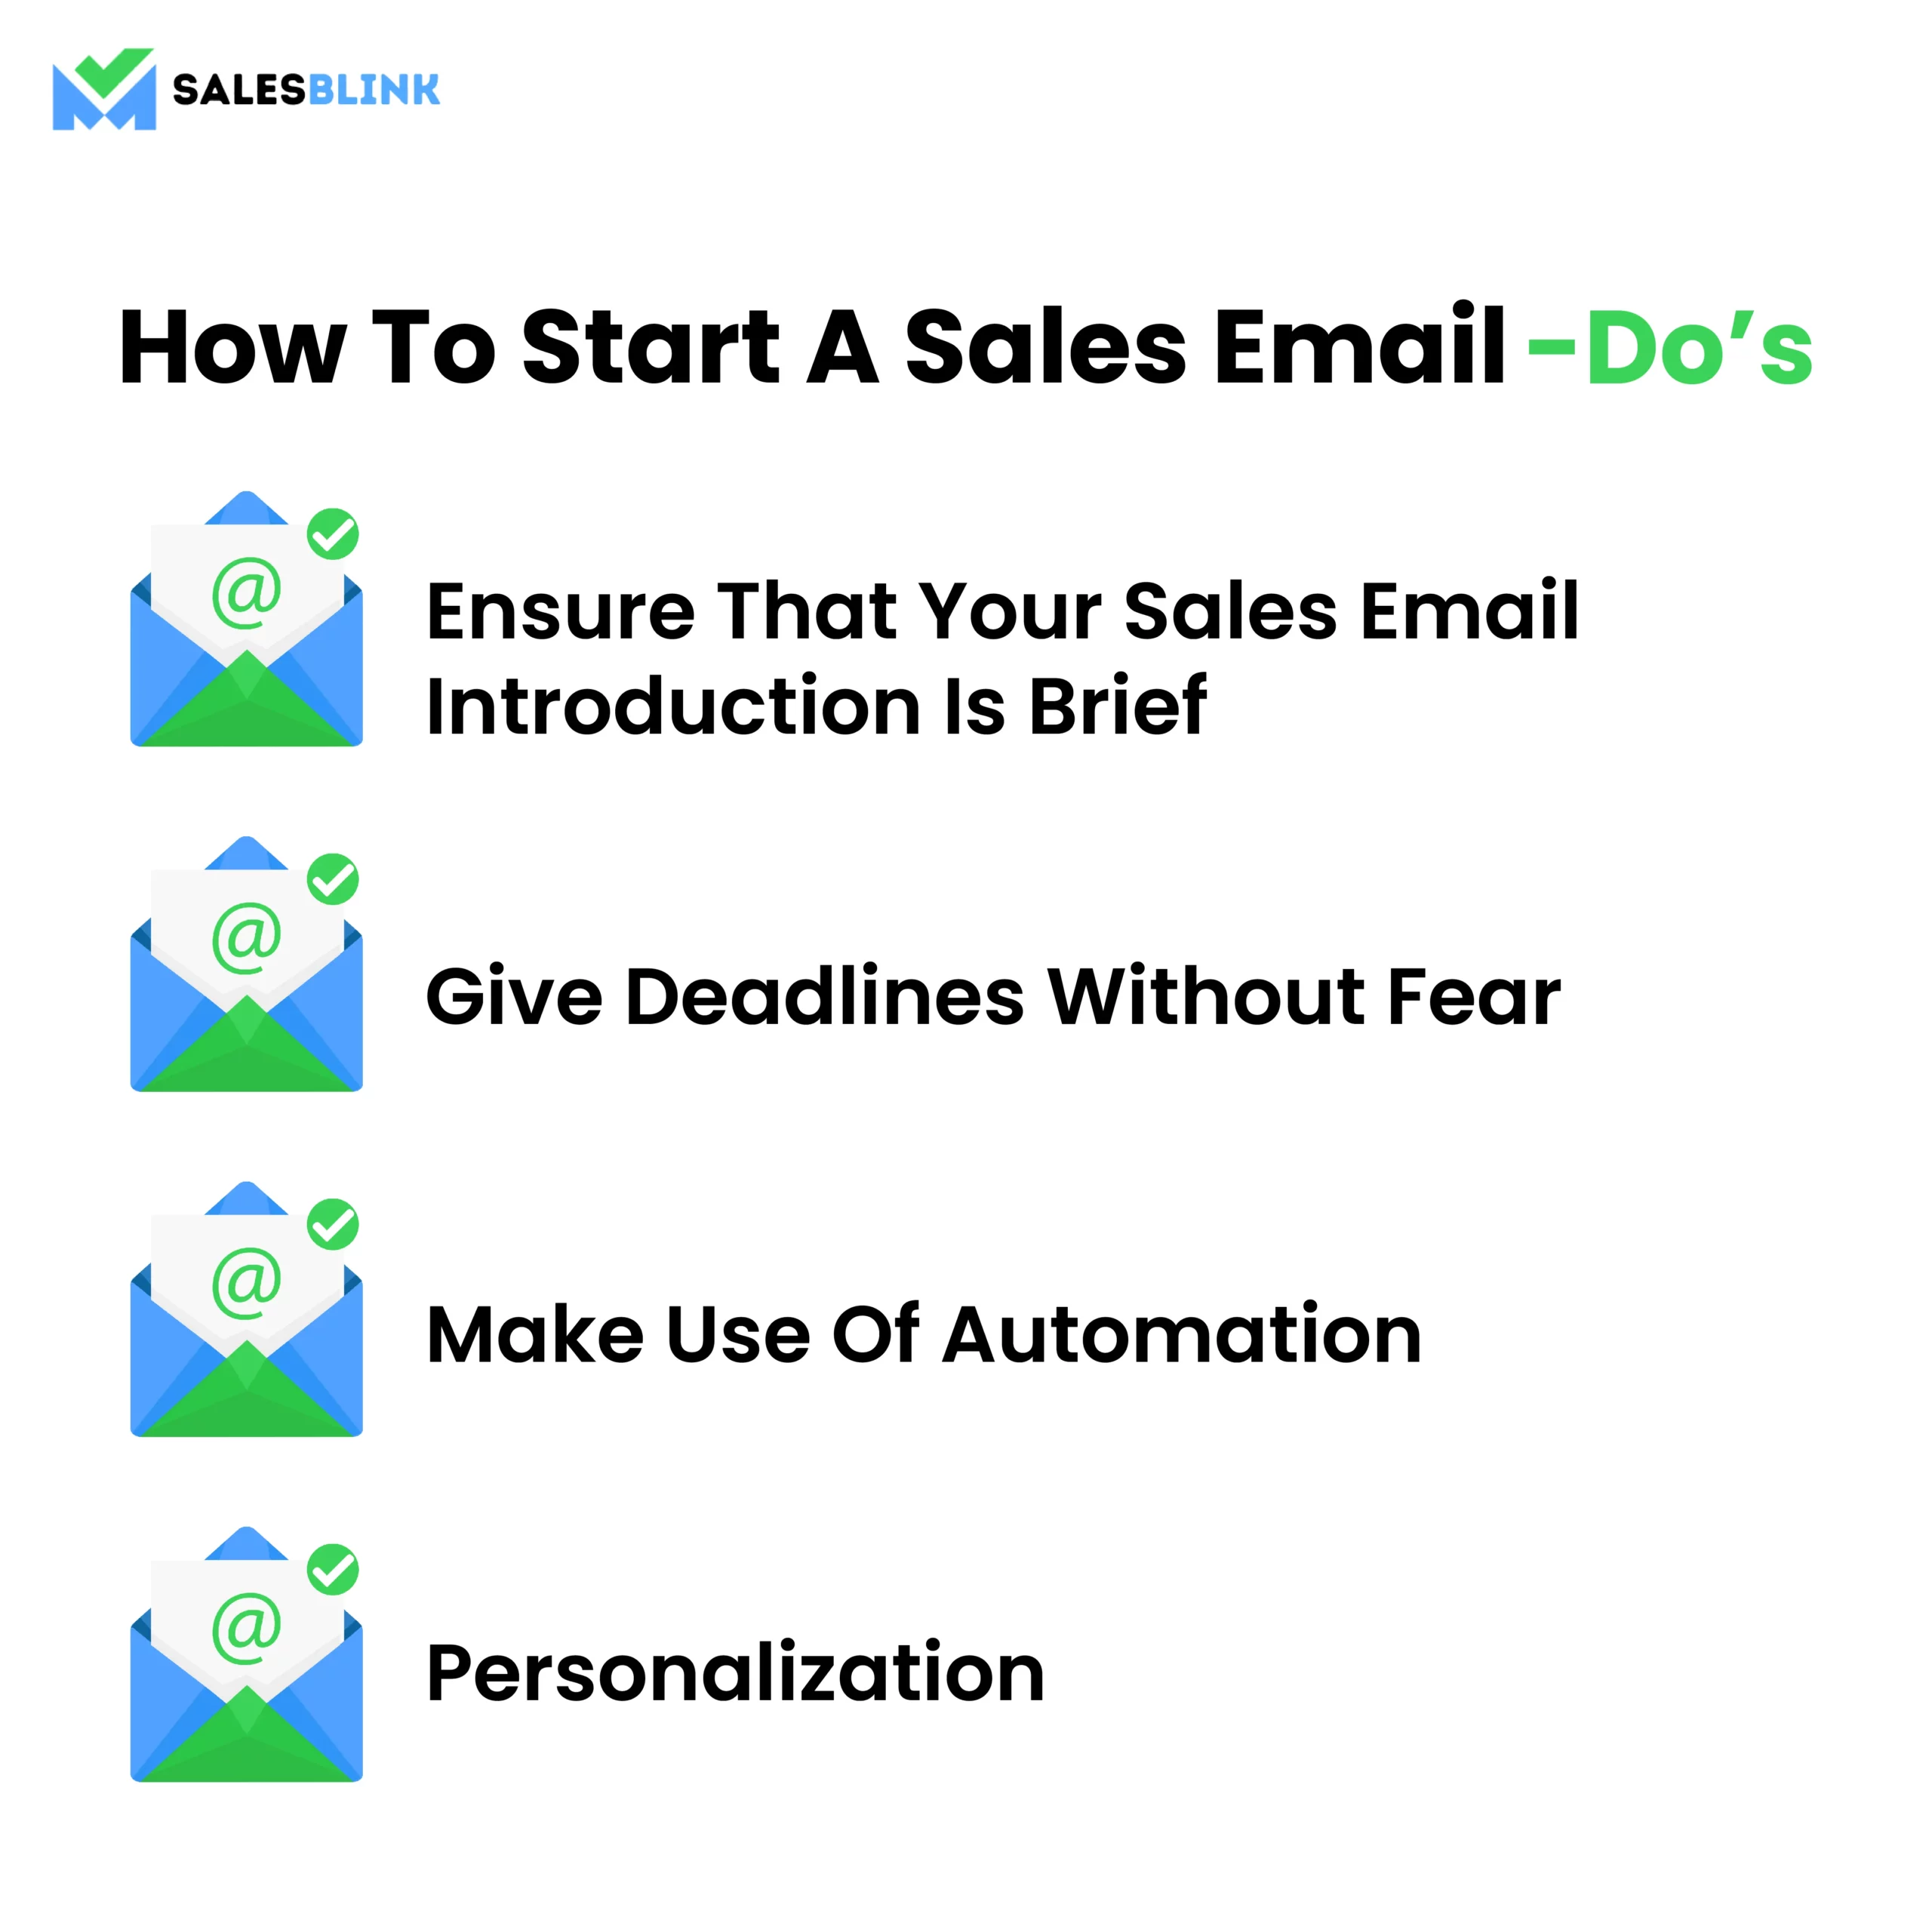 How To Start A Sales Email - Do's